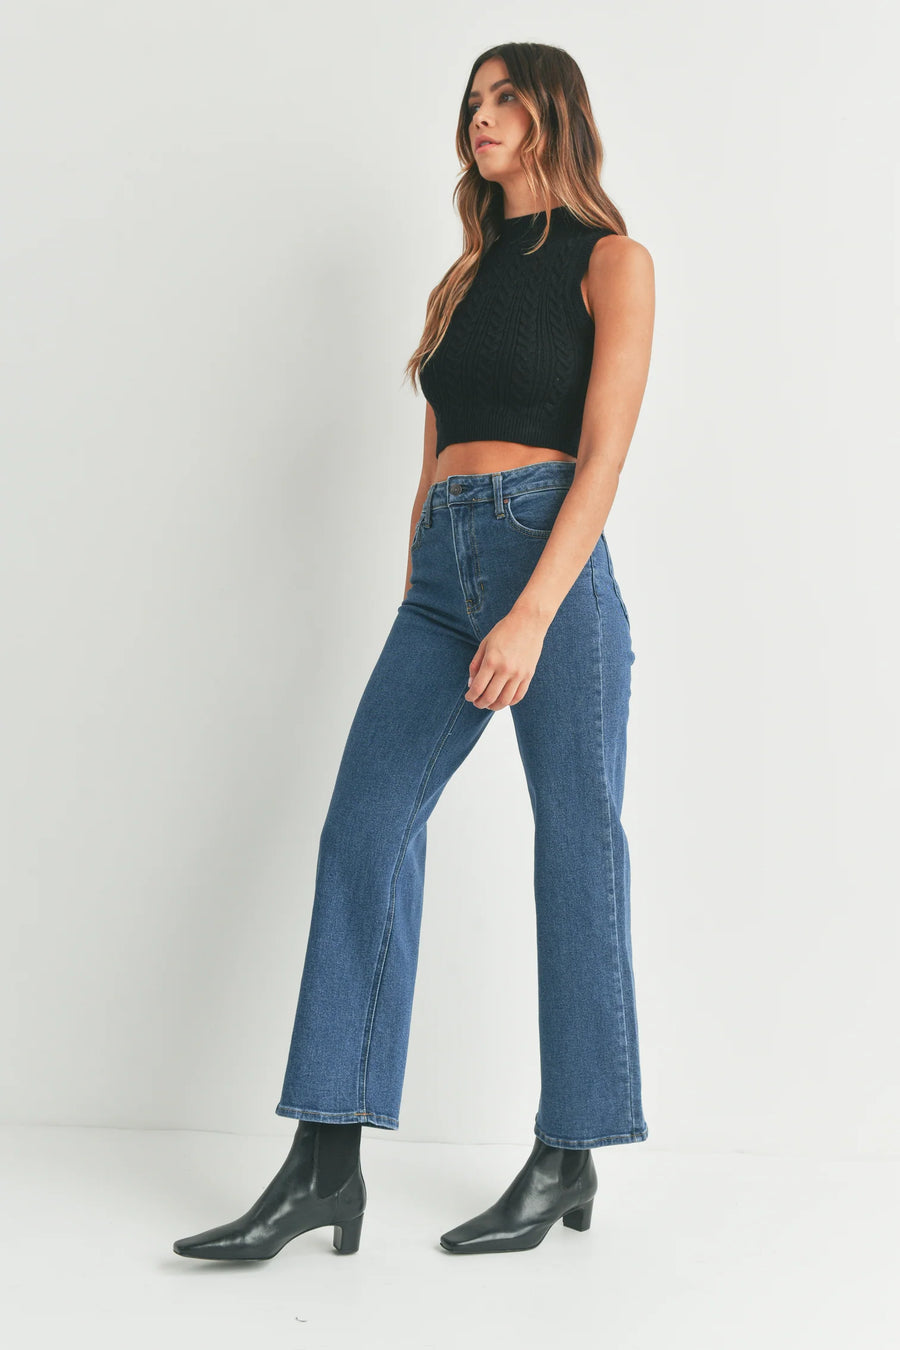 The Uncut Straight Jeans by Just Black Denim